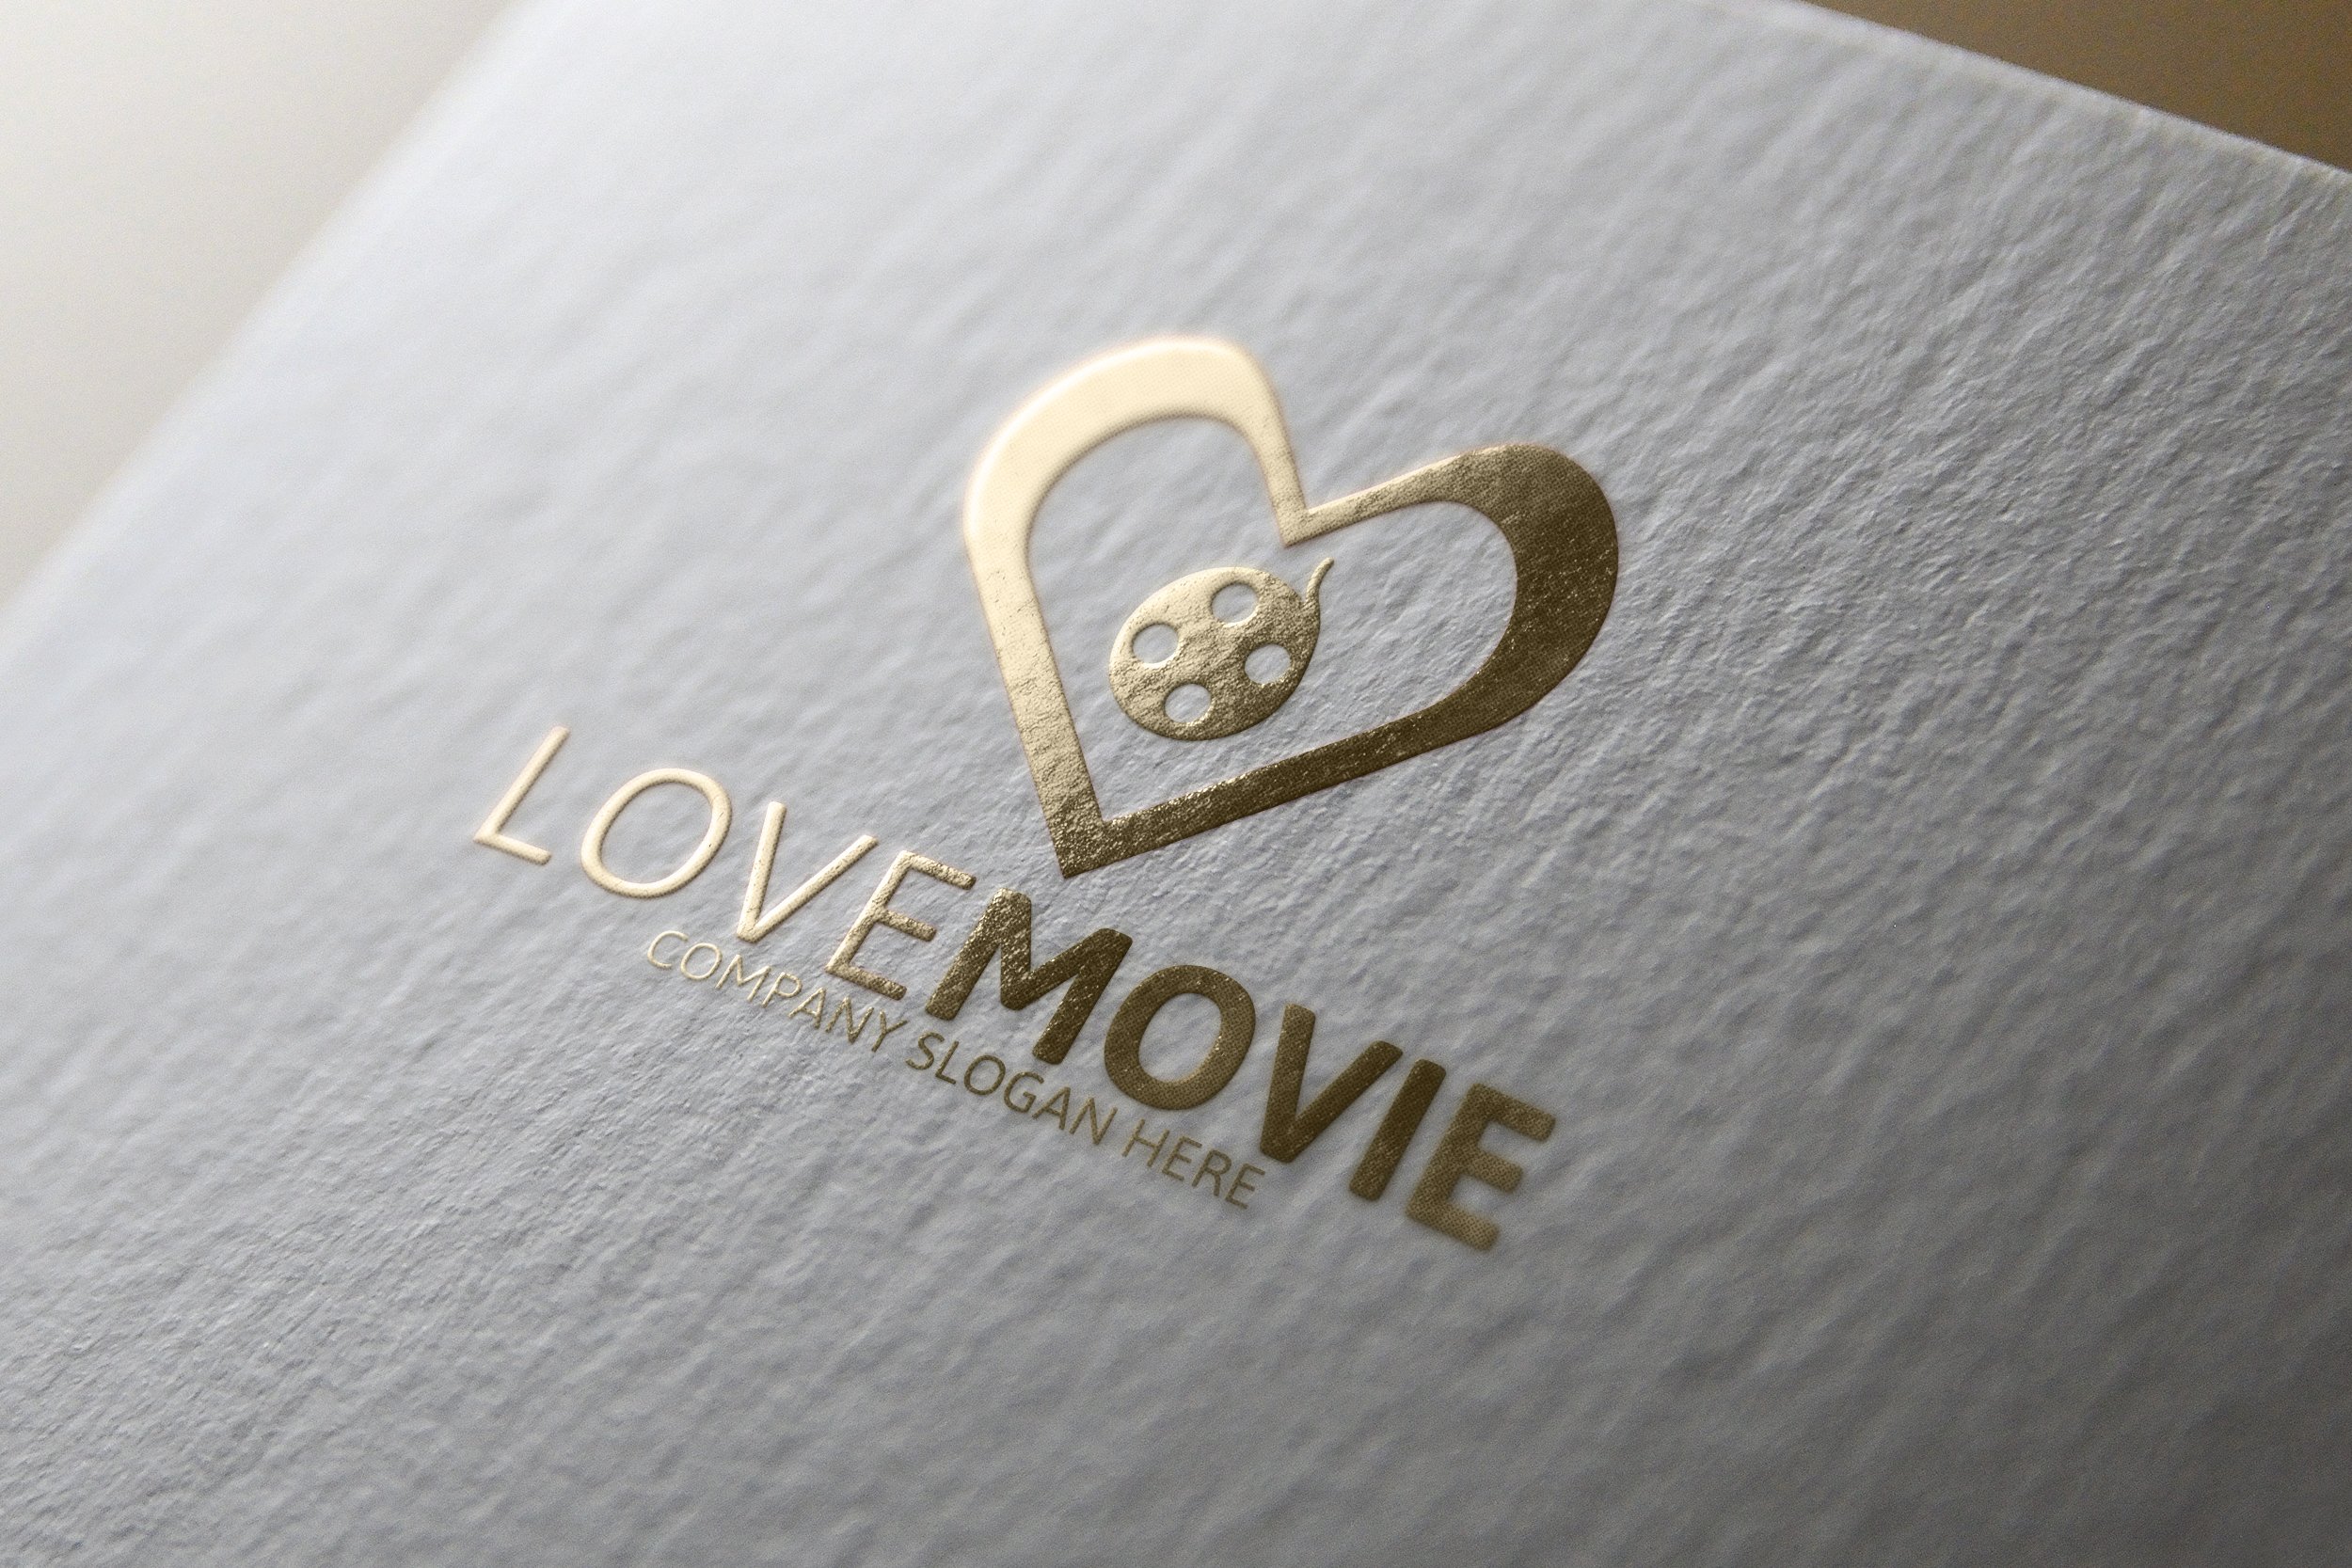 White paper with gold heart logo.